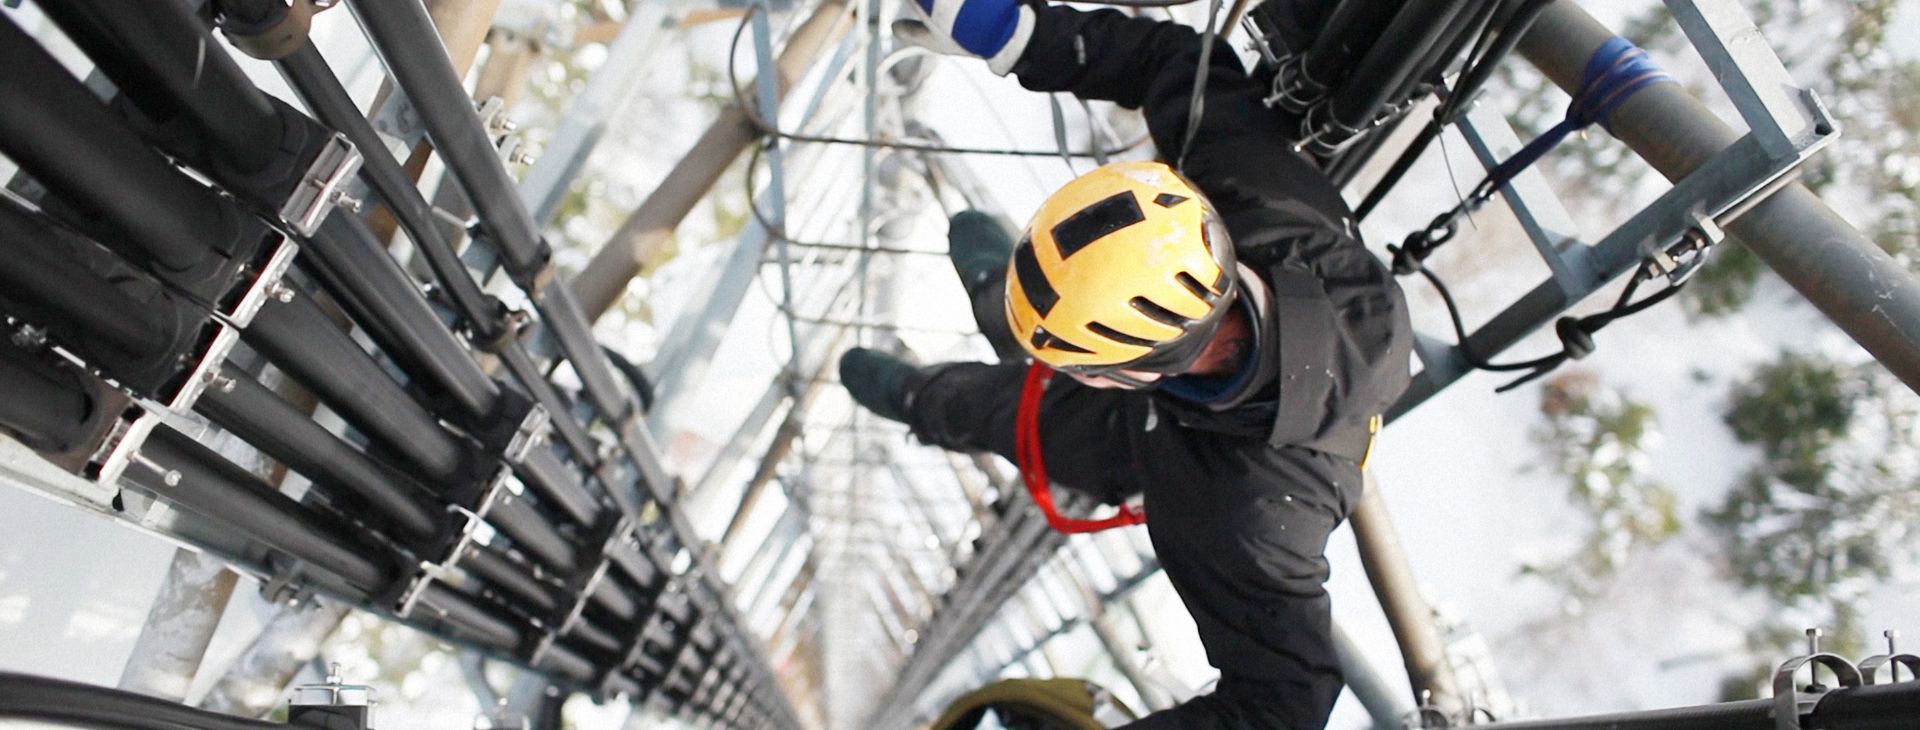 A man in a helmet climbing up a ladder, demonstrating determination and focus in his ascent.